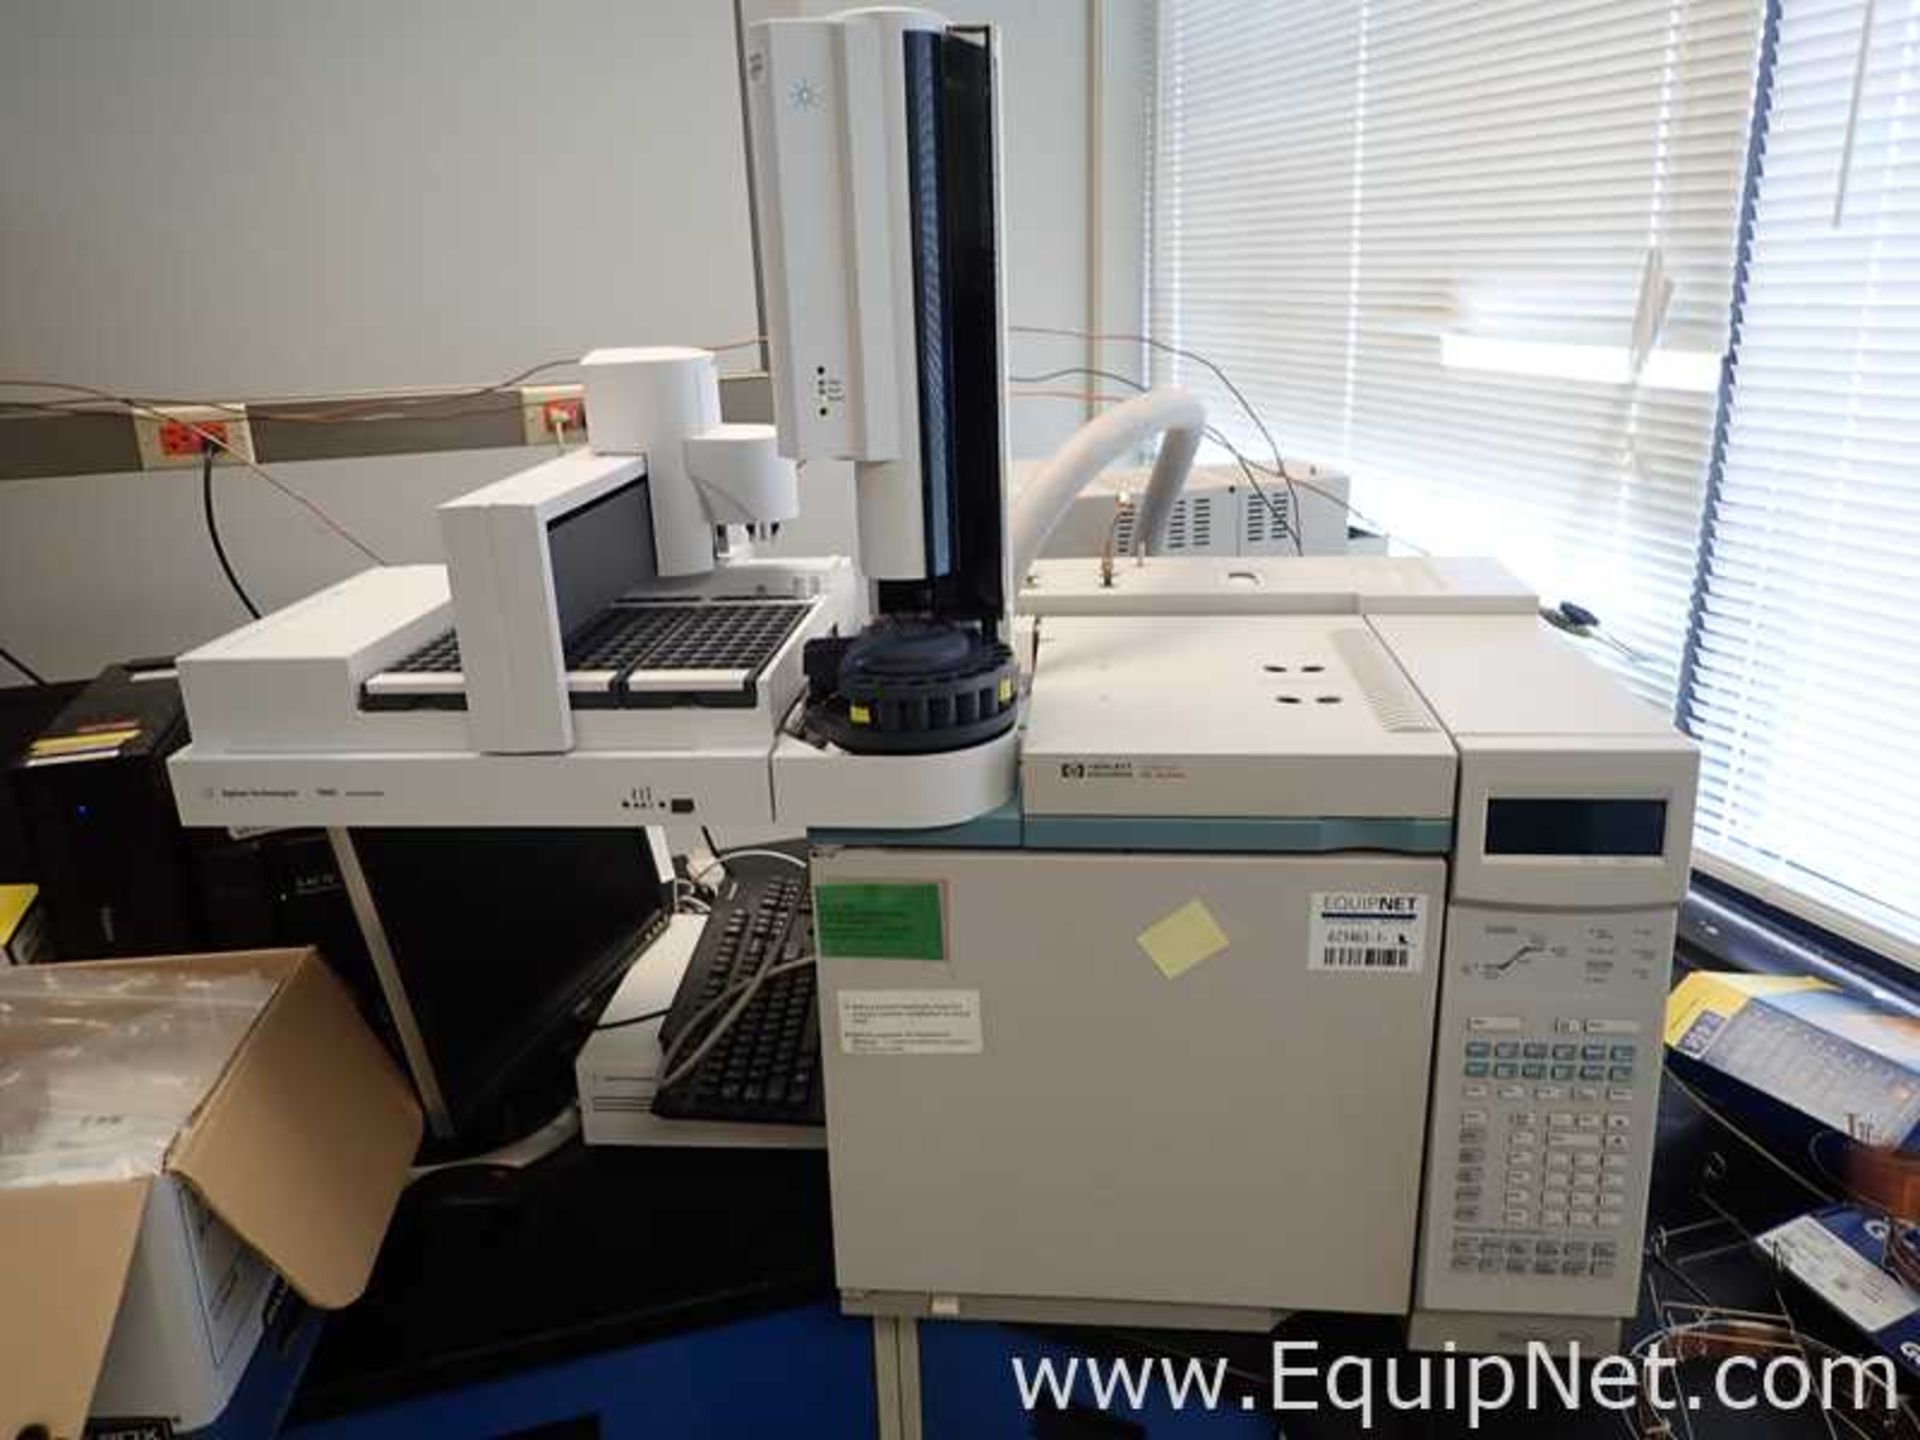 Agilent Technologies 6890 GC with 7693 AS, G4513A Injector, and G1888 Headspace Autosampler